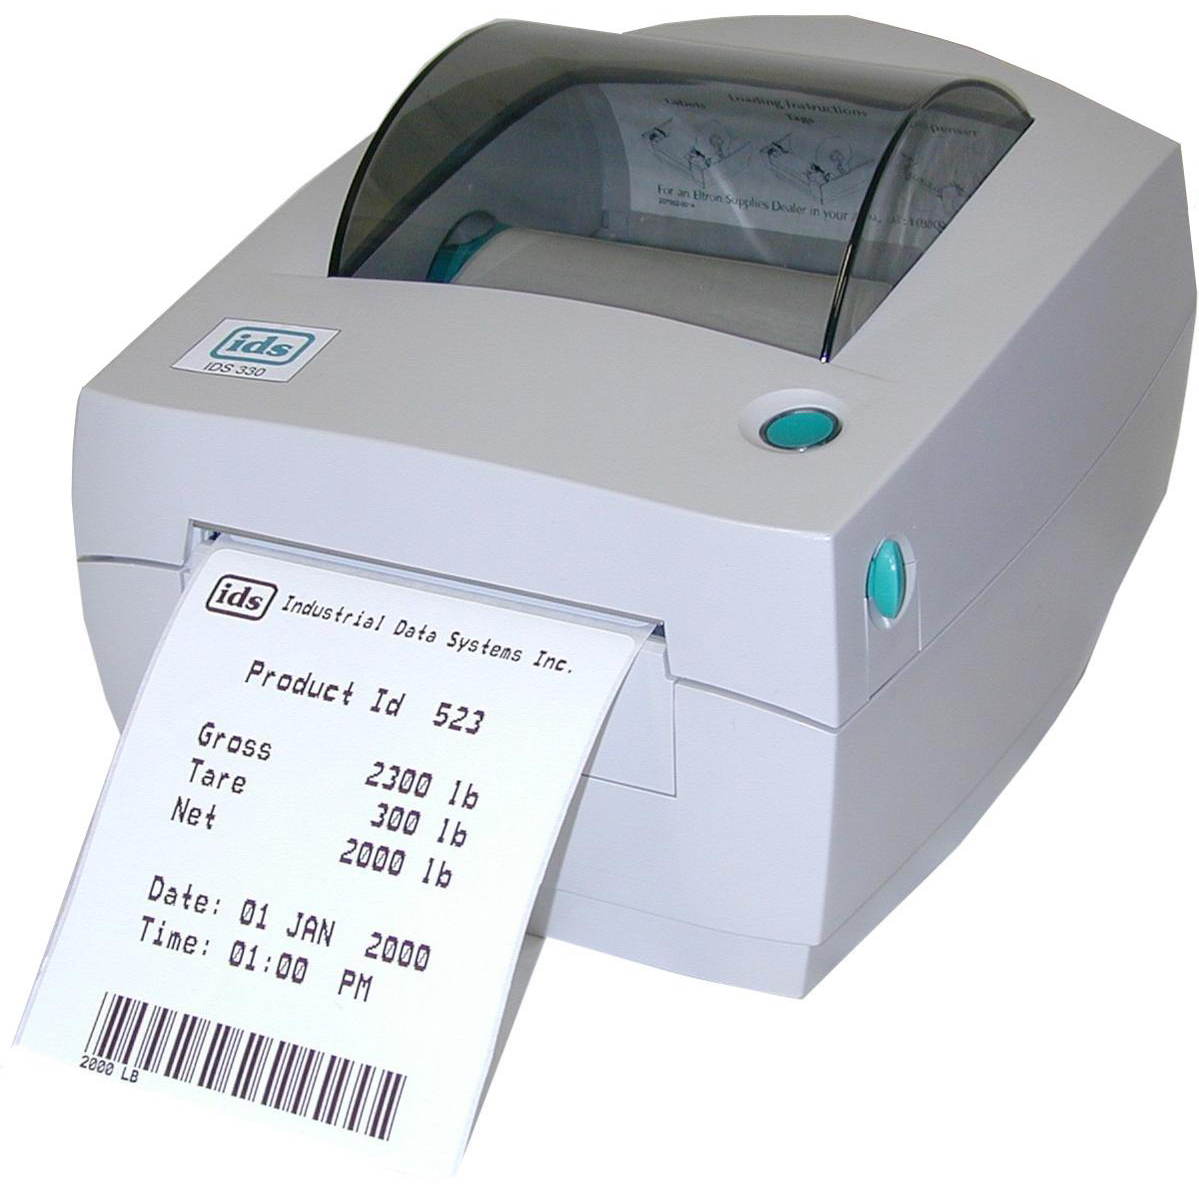 Industrial Data Systems 330 Thermal Label Printer - Click Image to Close